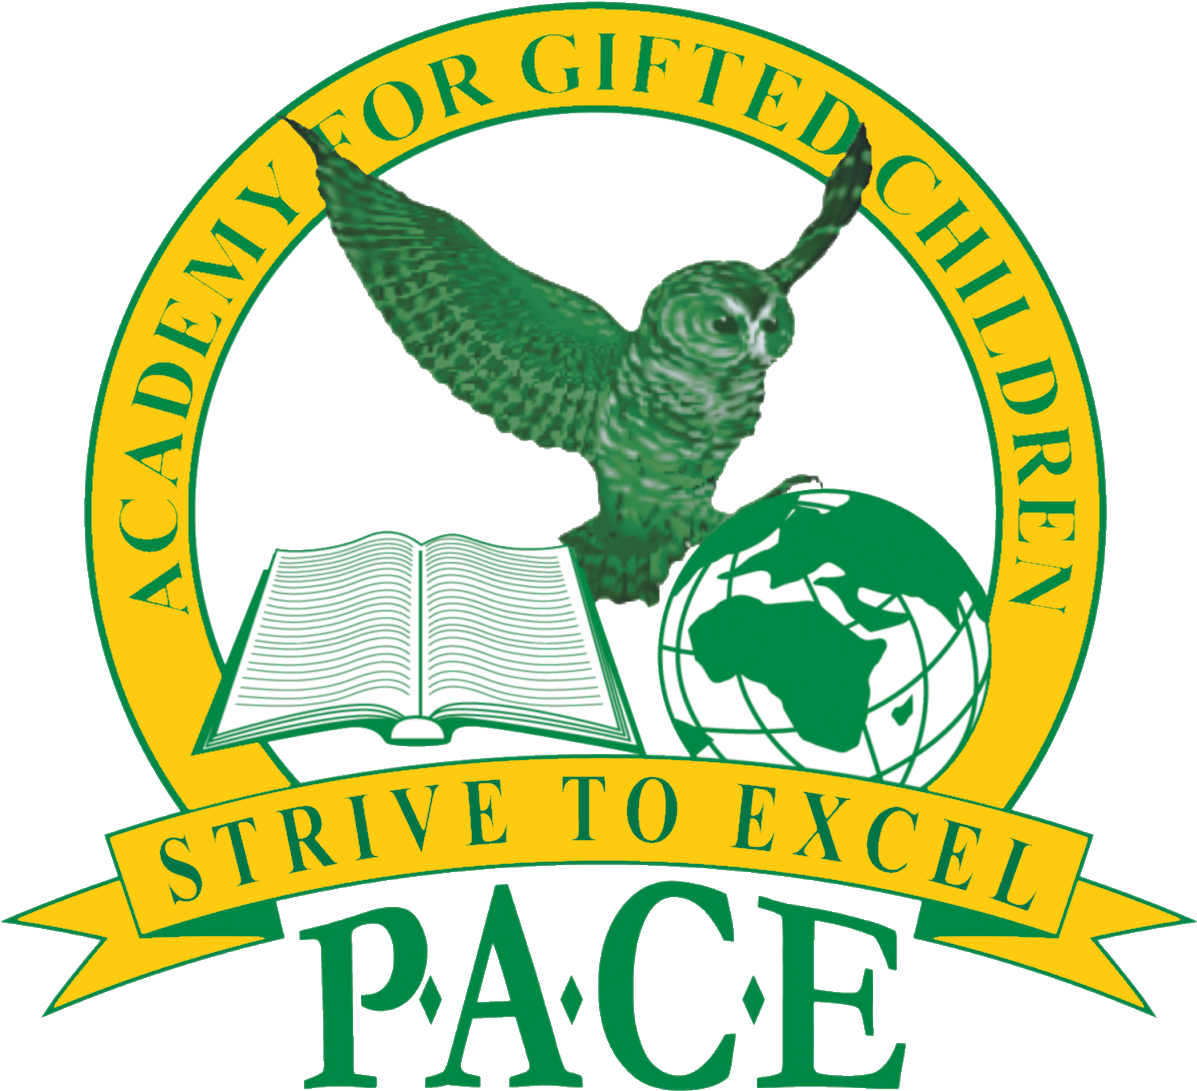 The Academy For Gifted Children P - Academy For Gifted Children (1200x1113)